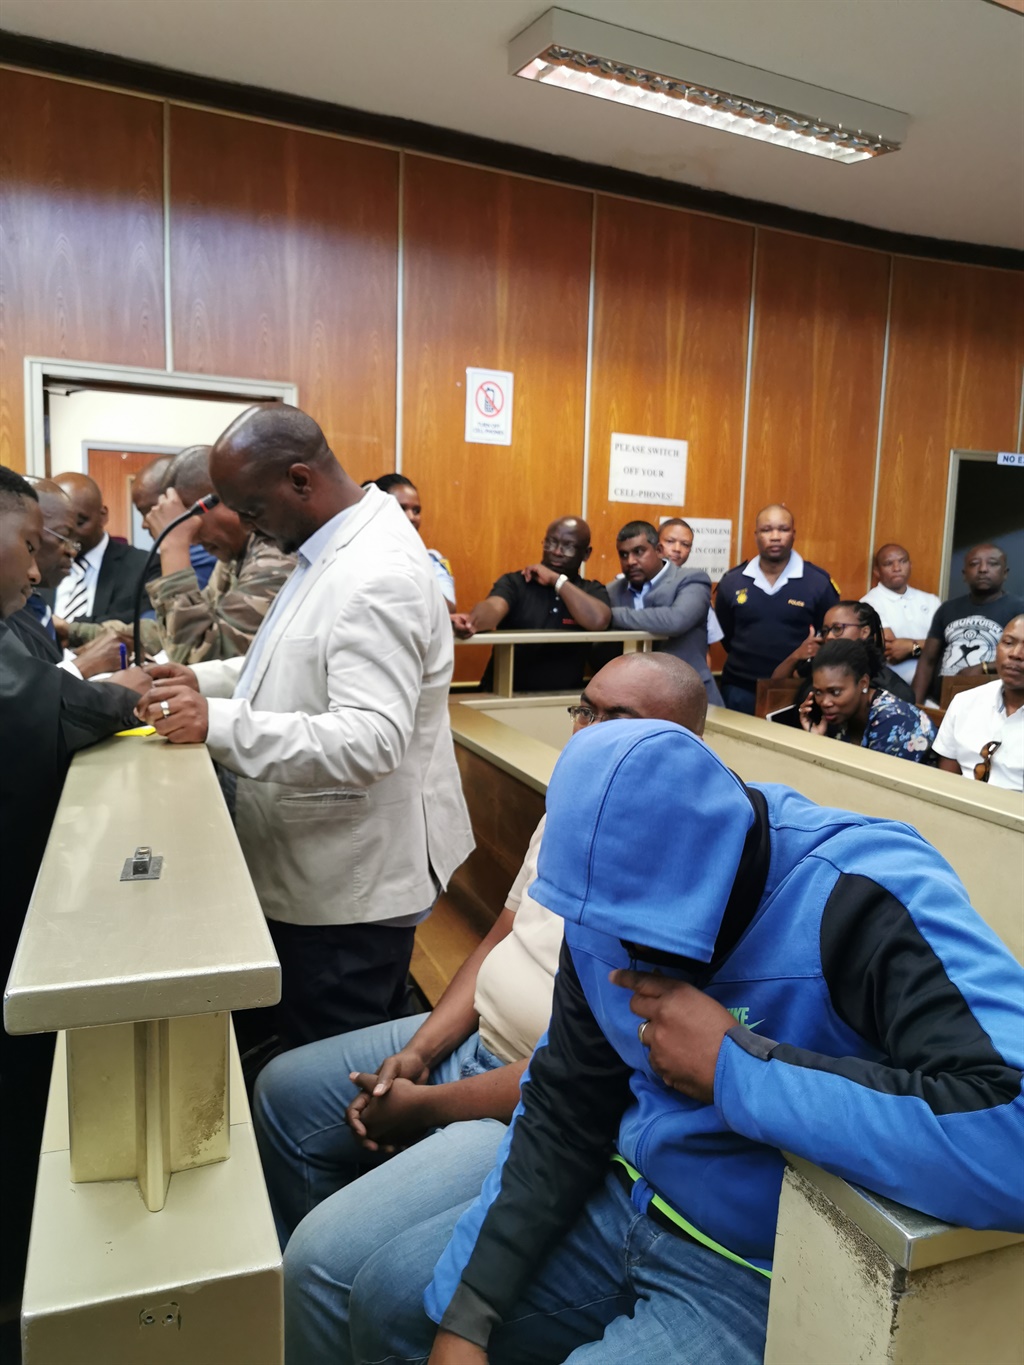 The 10 accused appeared at the East London Magistrates Court on Friday, Eastern Cape. Photos Lubabalo Ngcukana/ City Press 

